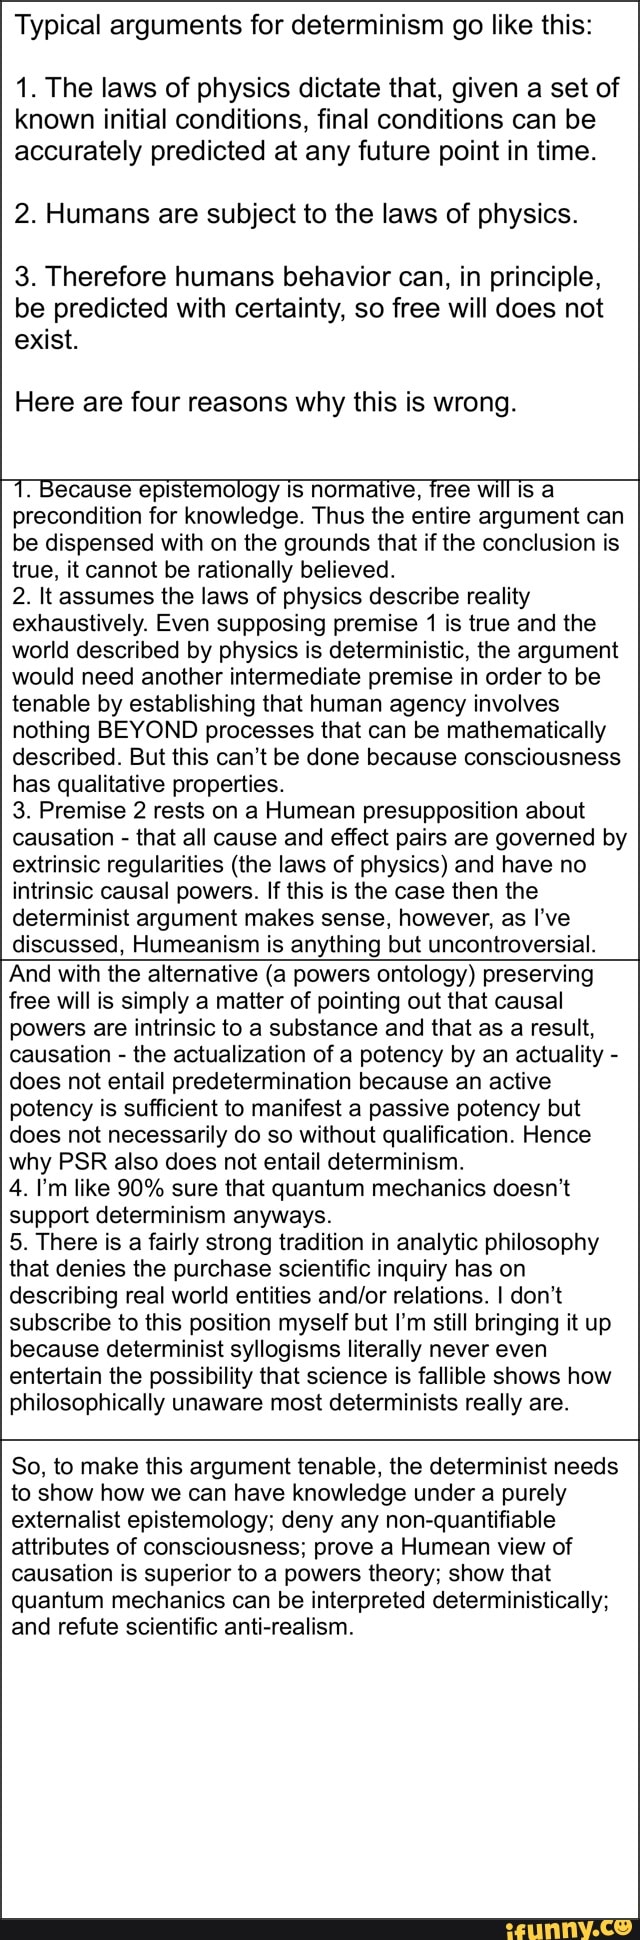 SCIENCE IS NOT ABOUT CERTAINTY: A PHILOSOPHY OF PHYSICS